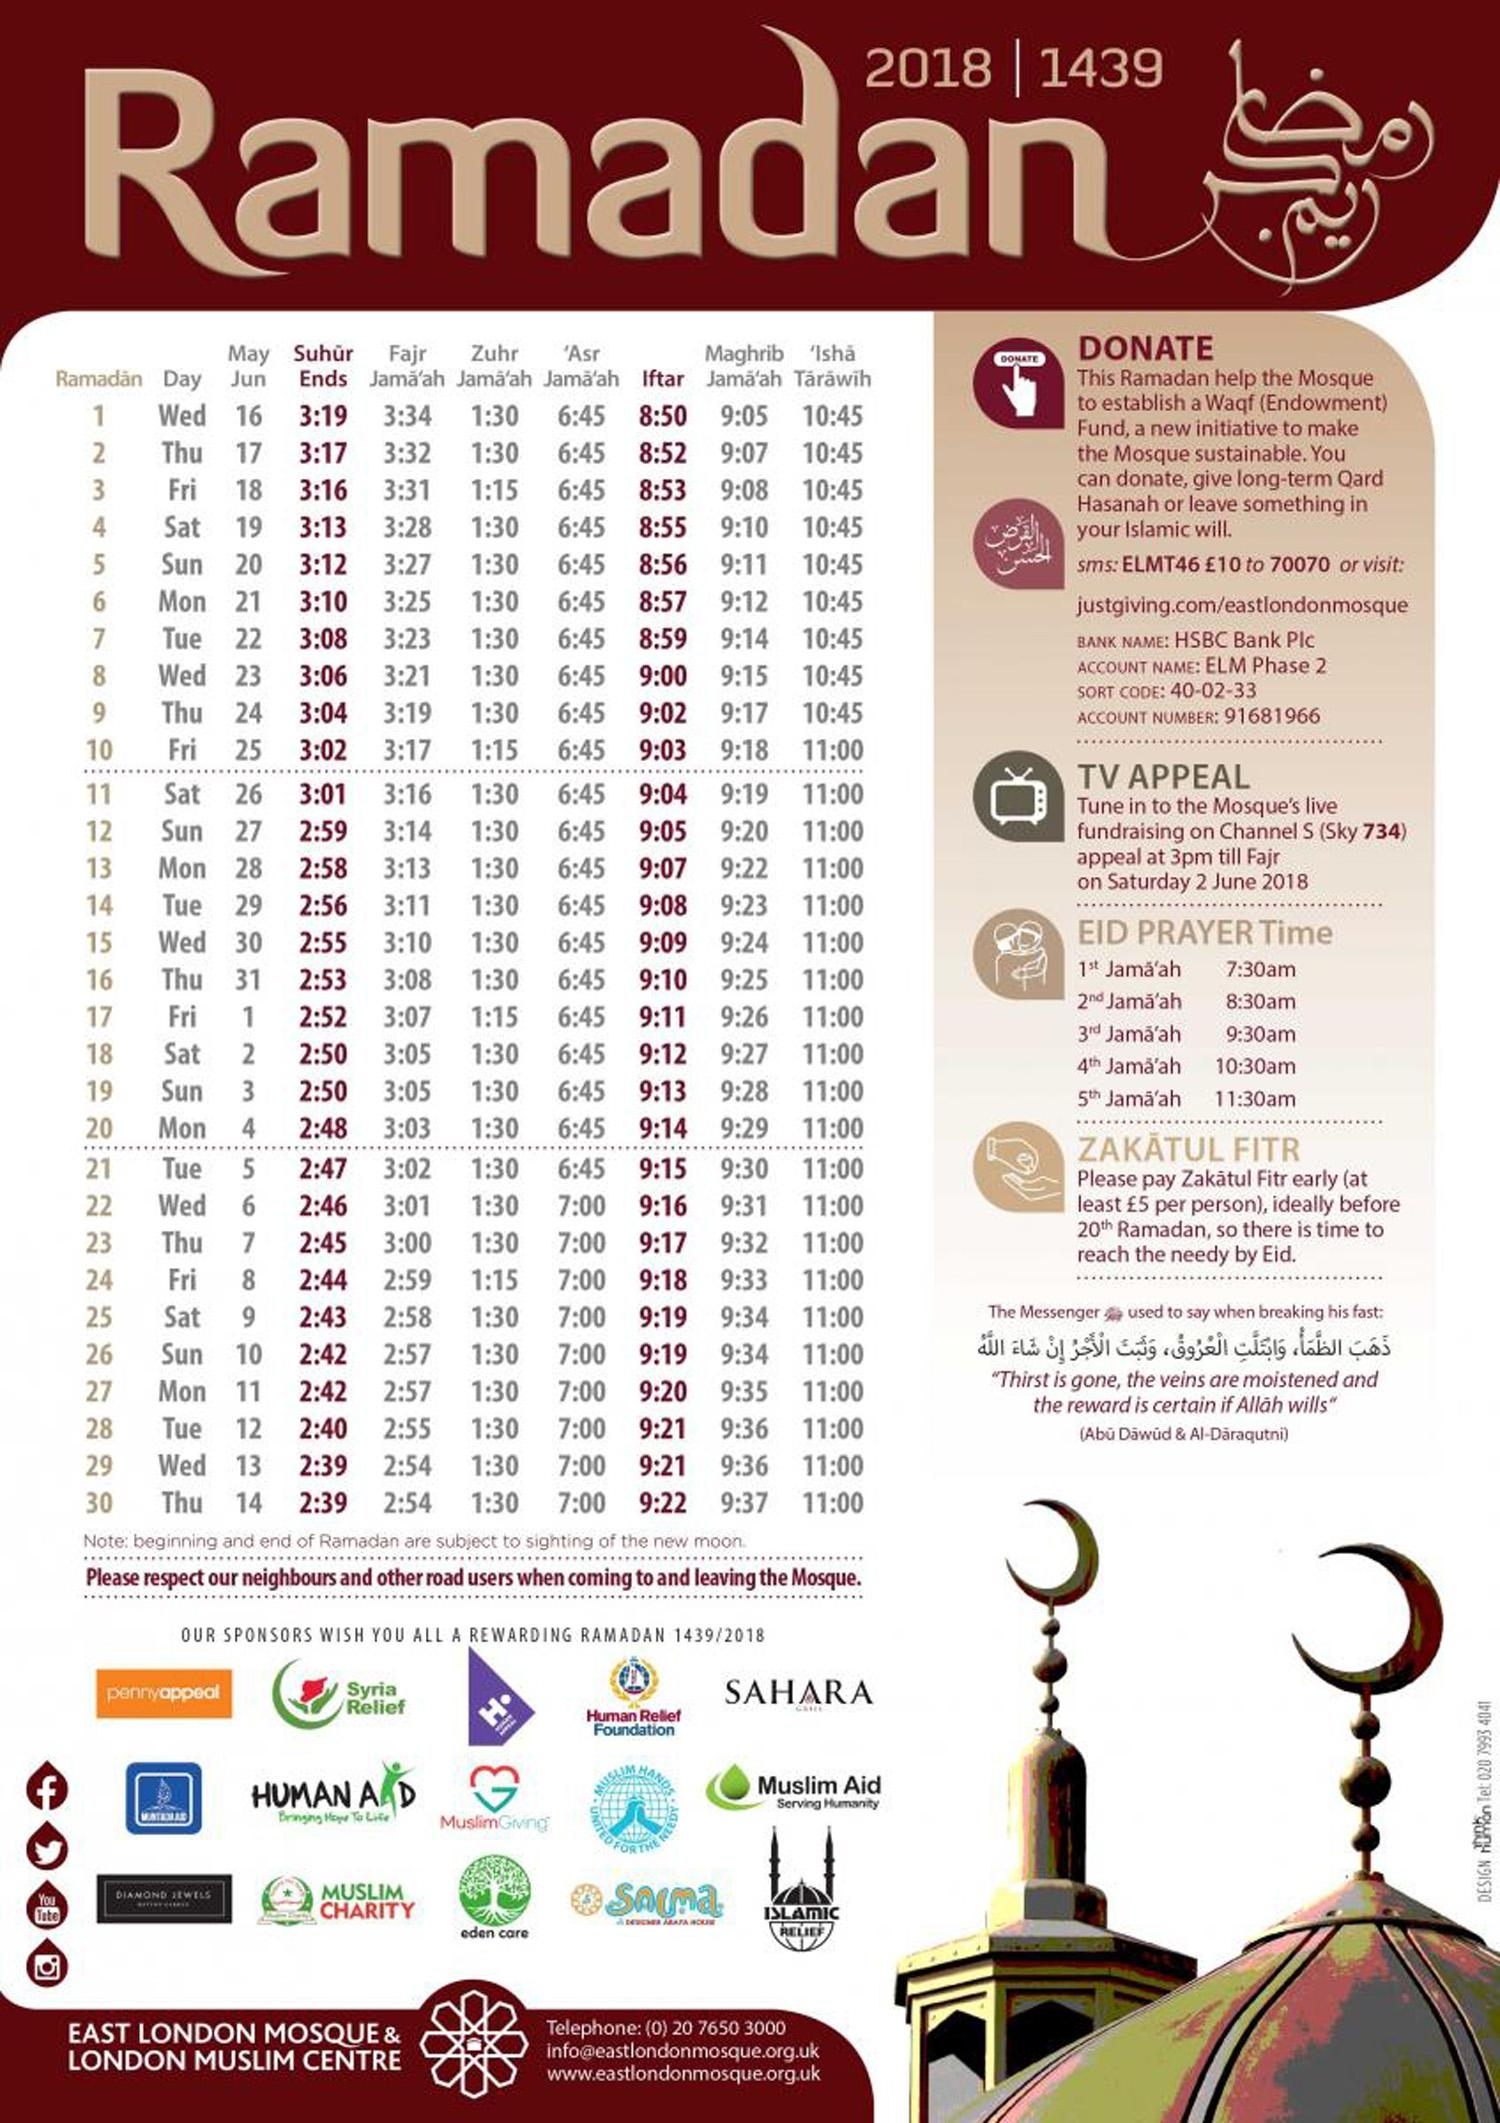 Ramadan 2018 Timetable For The Uk: These Are The Prayer, Fasting And inside Islamic Calendar For Ramadan For The Future